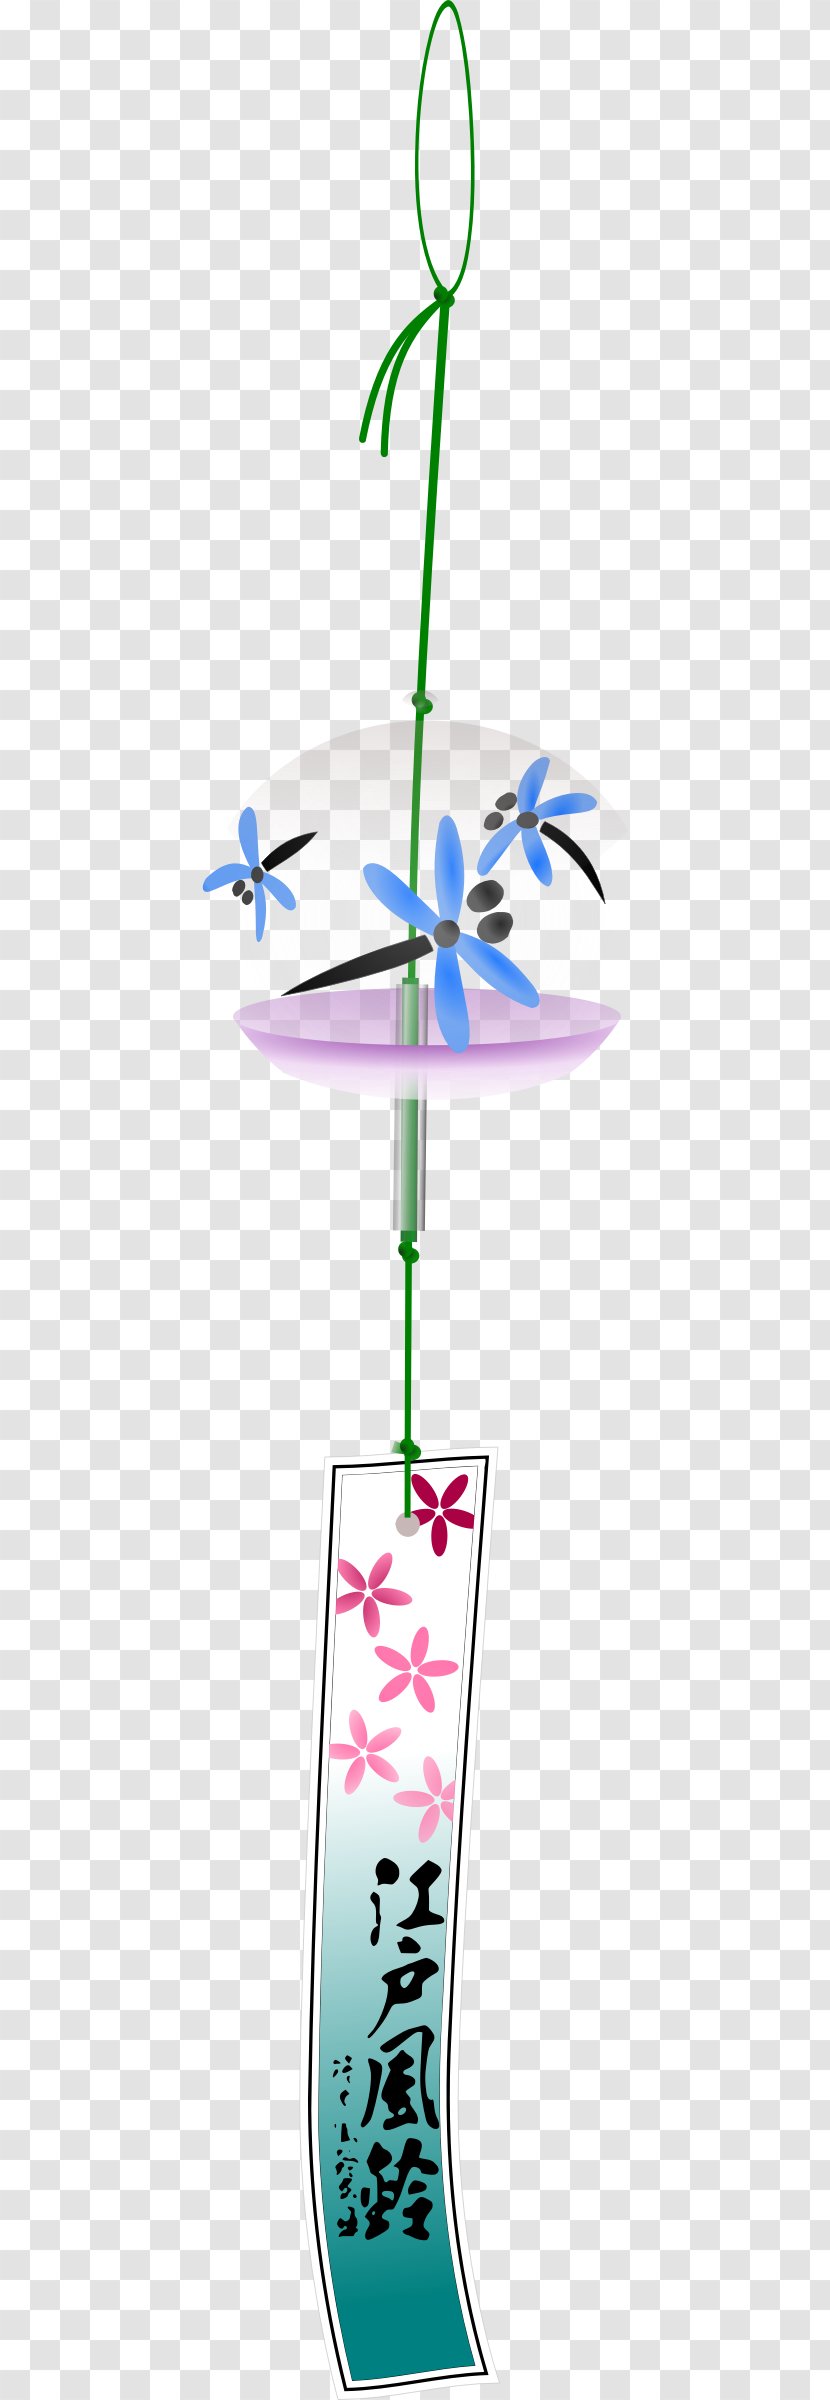 Japan Wind Chimes Clip Art - Chime Transparent PNG